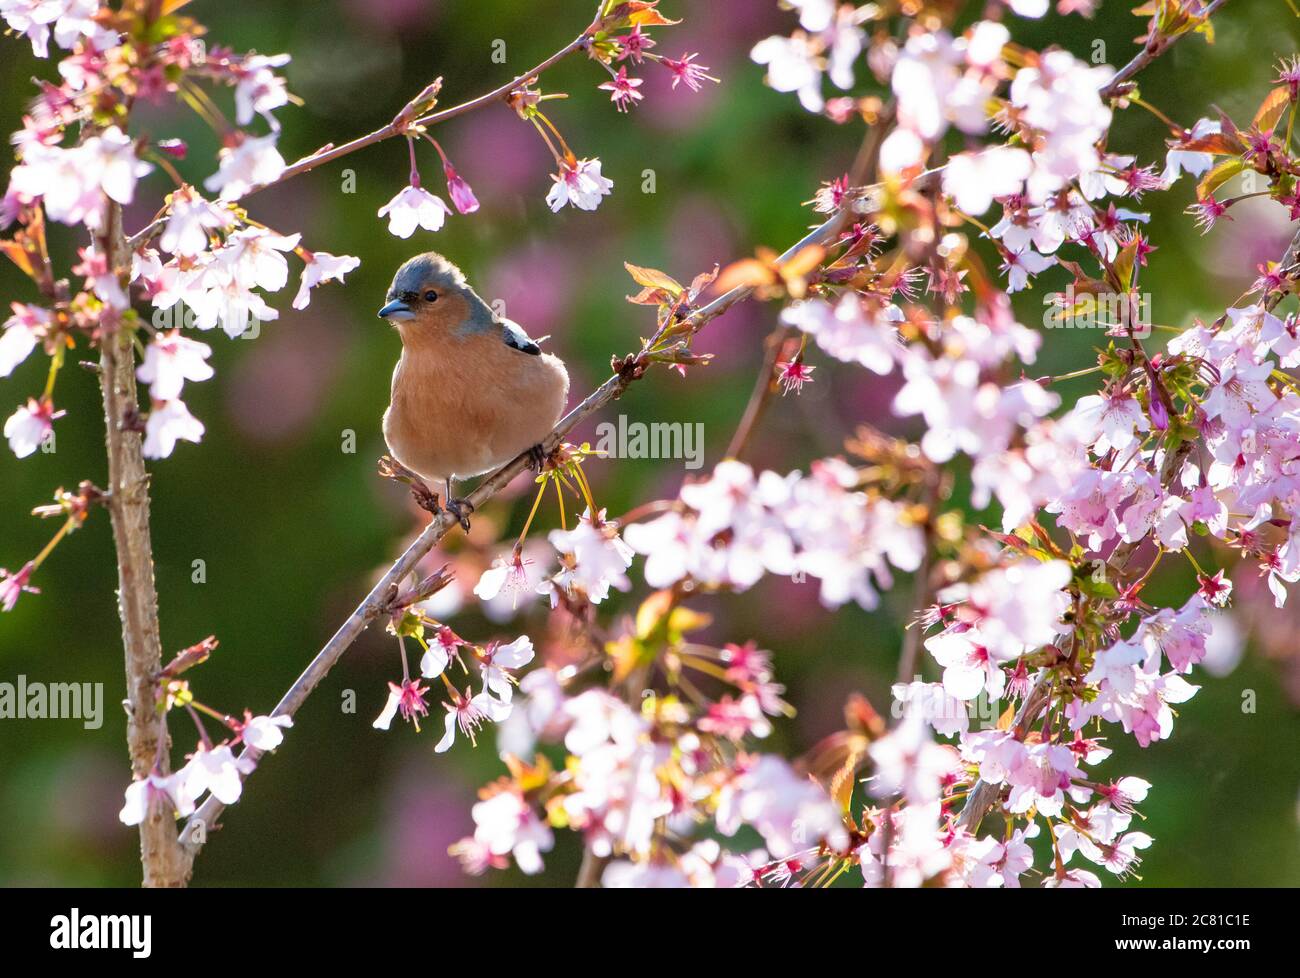 Male Chaffinch (Fringilla coelebs) perched in a Japanese cherry tree with spring cherry blossom, Chipping, Preston, Lancashire. Stock Photo